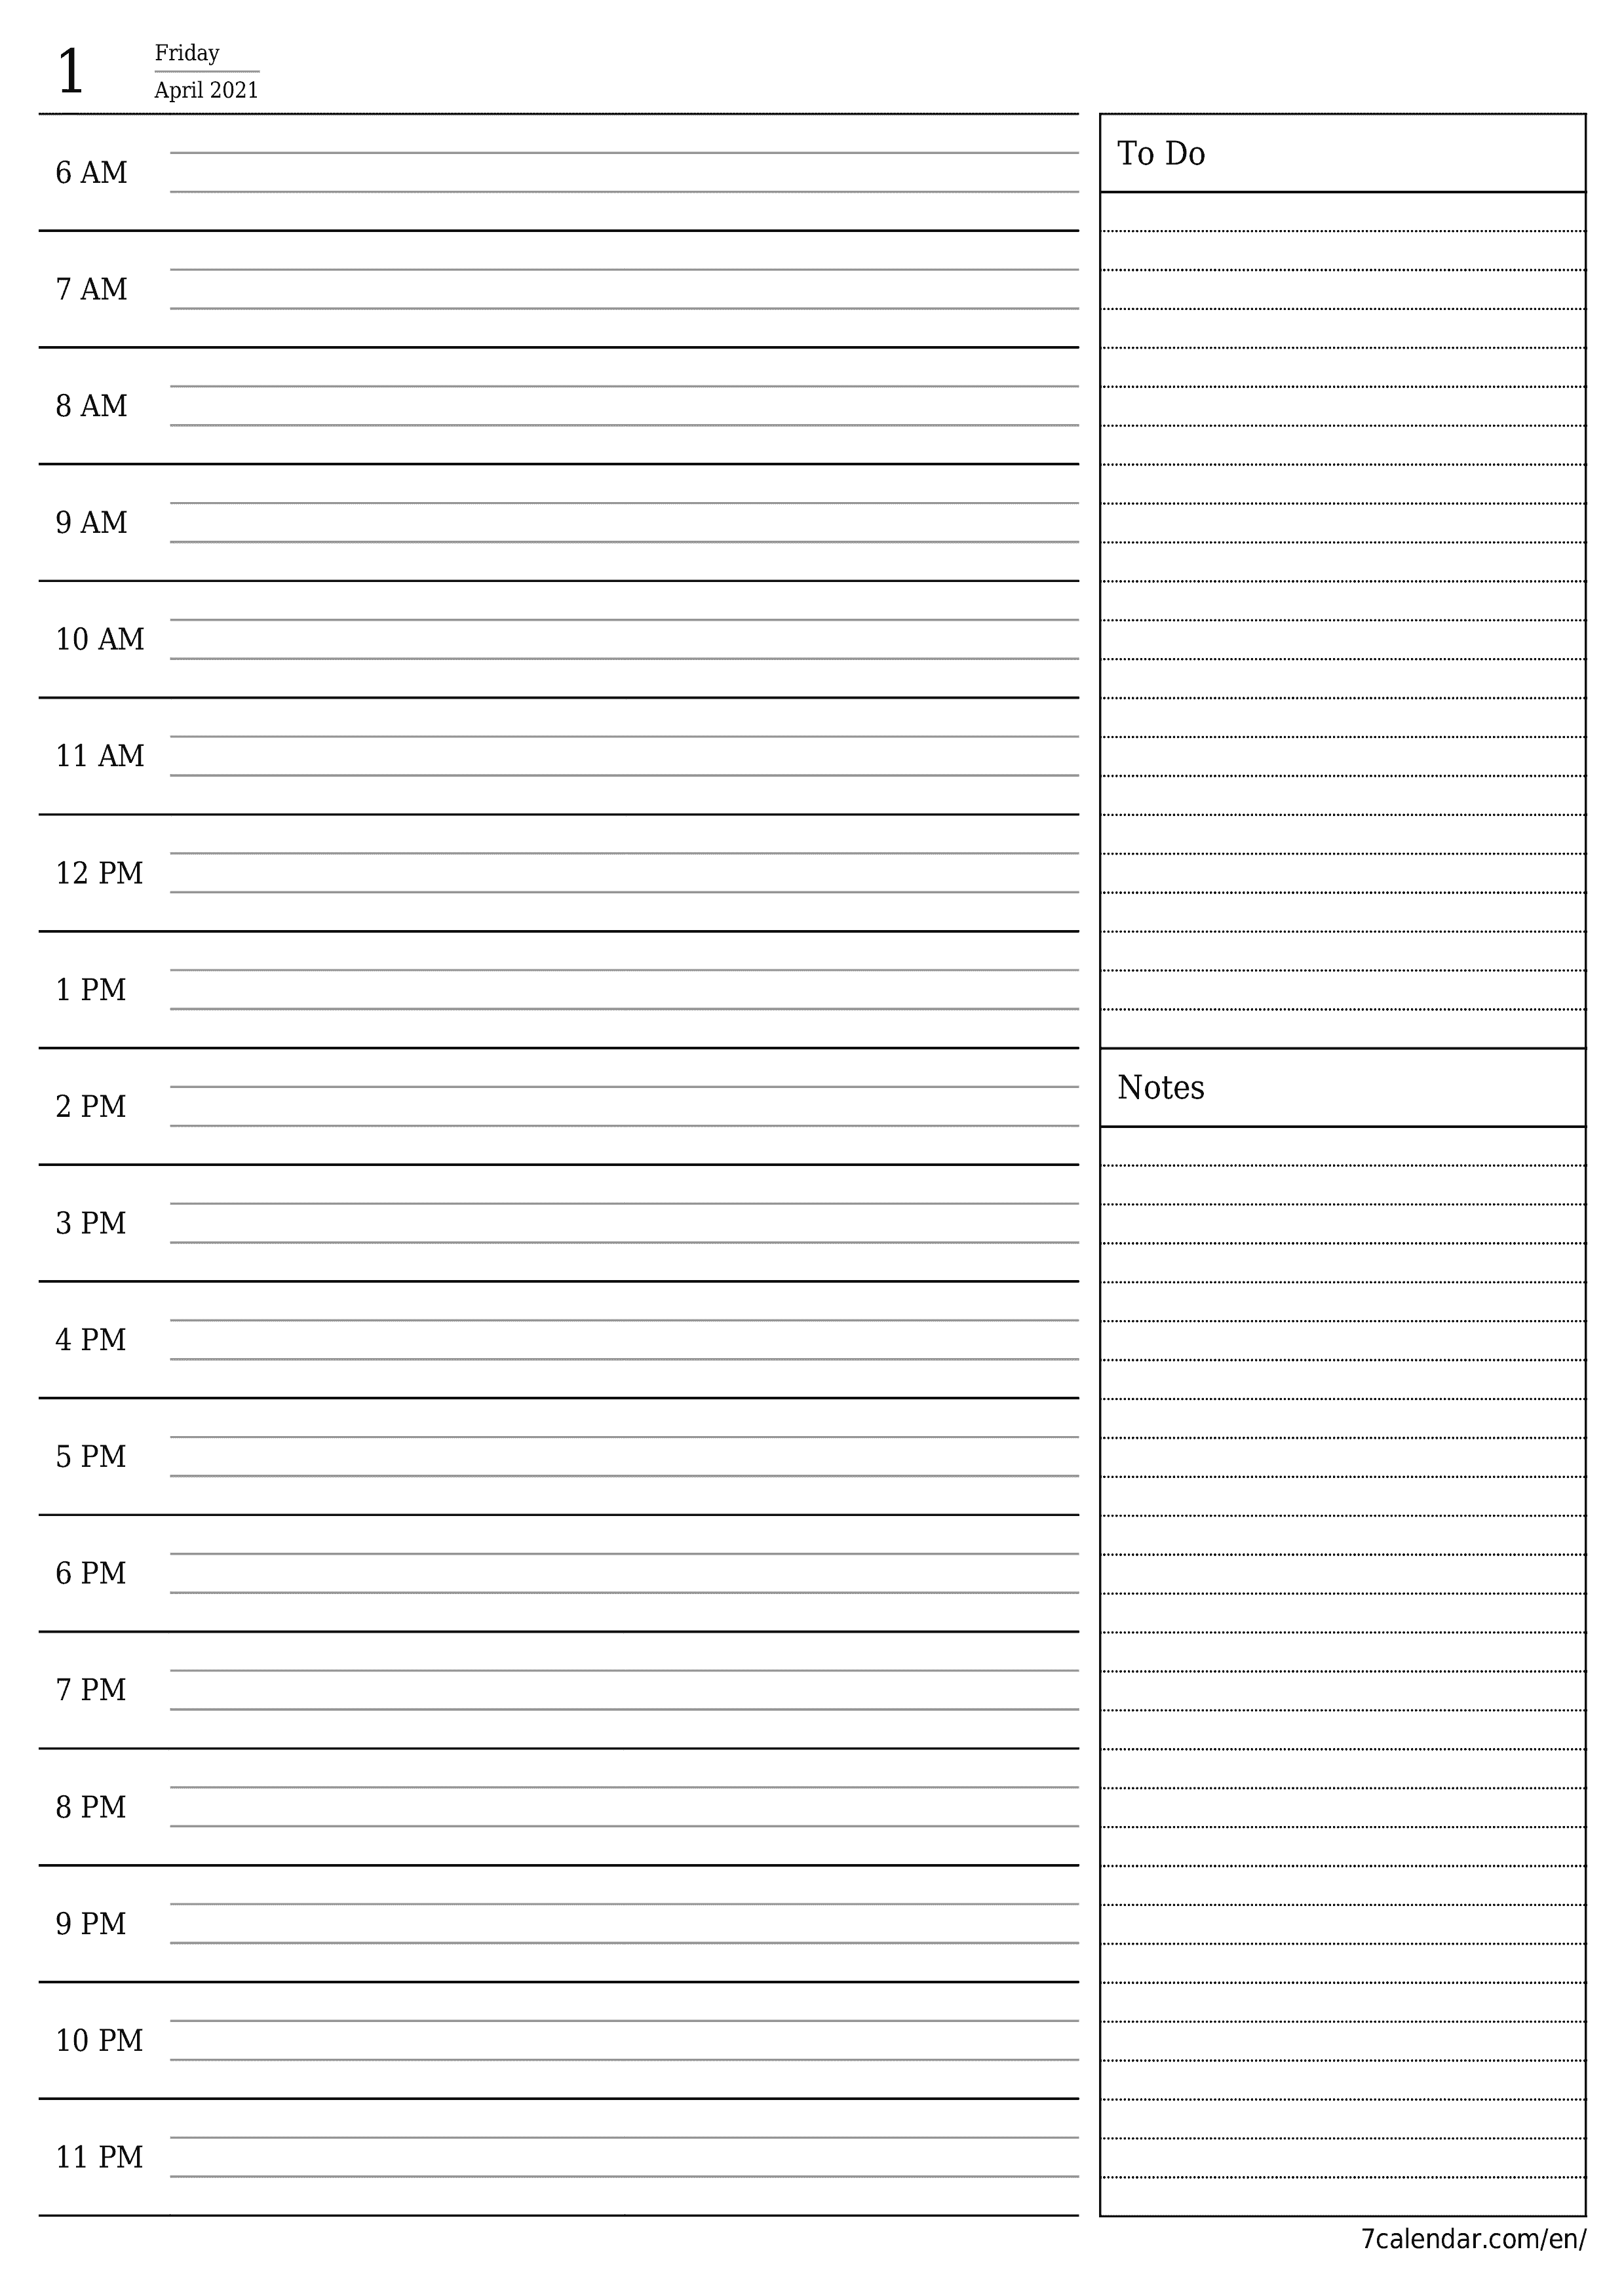 Blank daily calendar planner for day April 2021 with notes, save and print to PDF PNG English - 7calendar.com